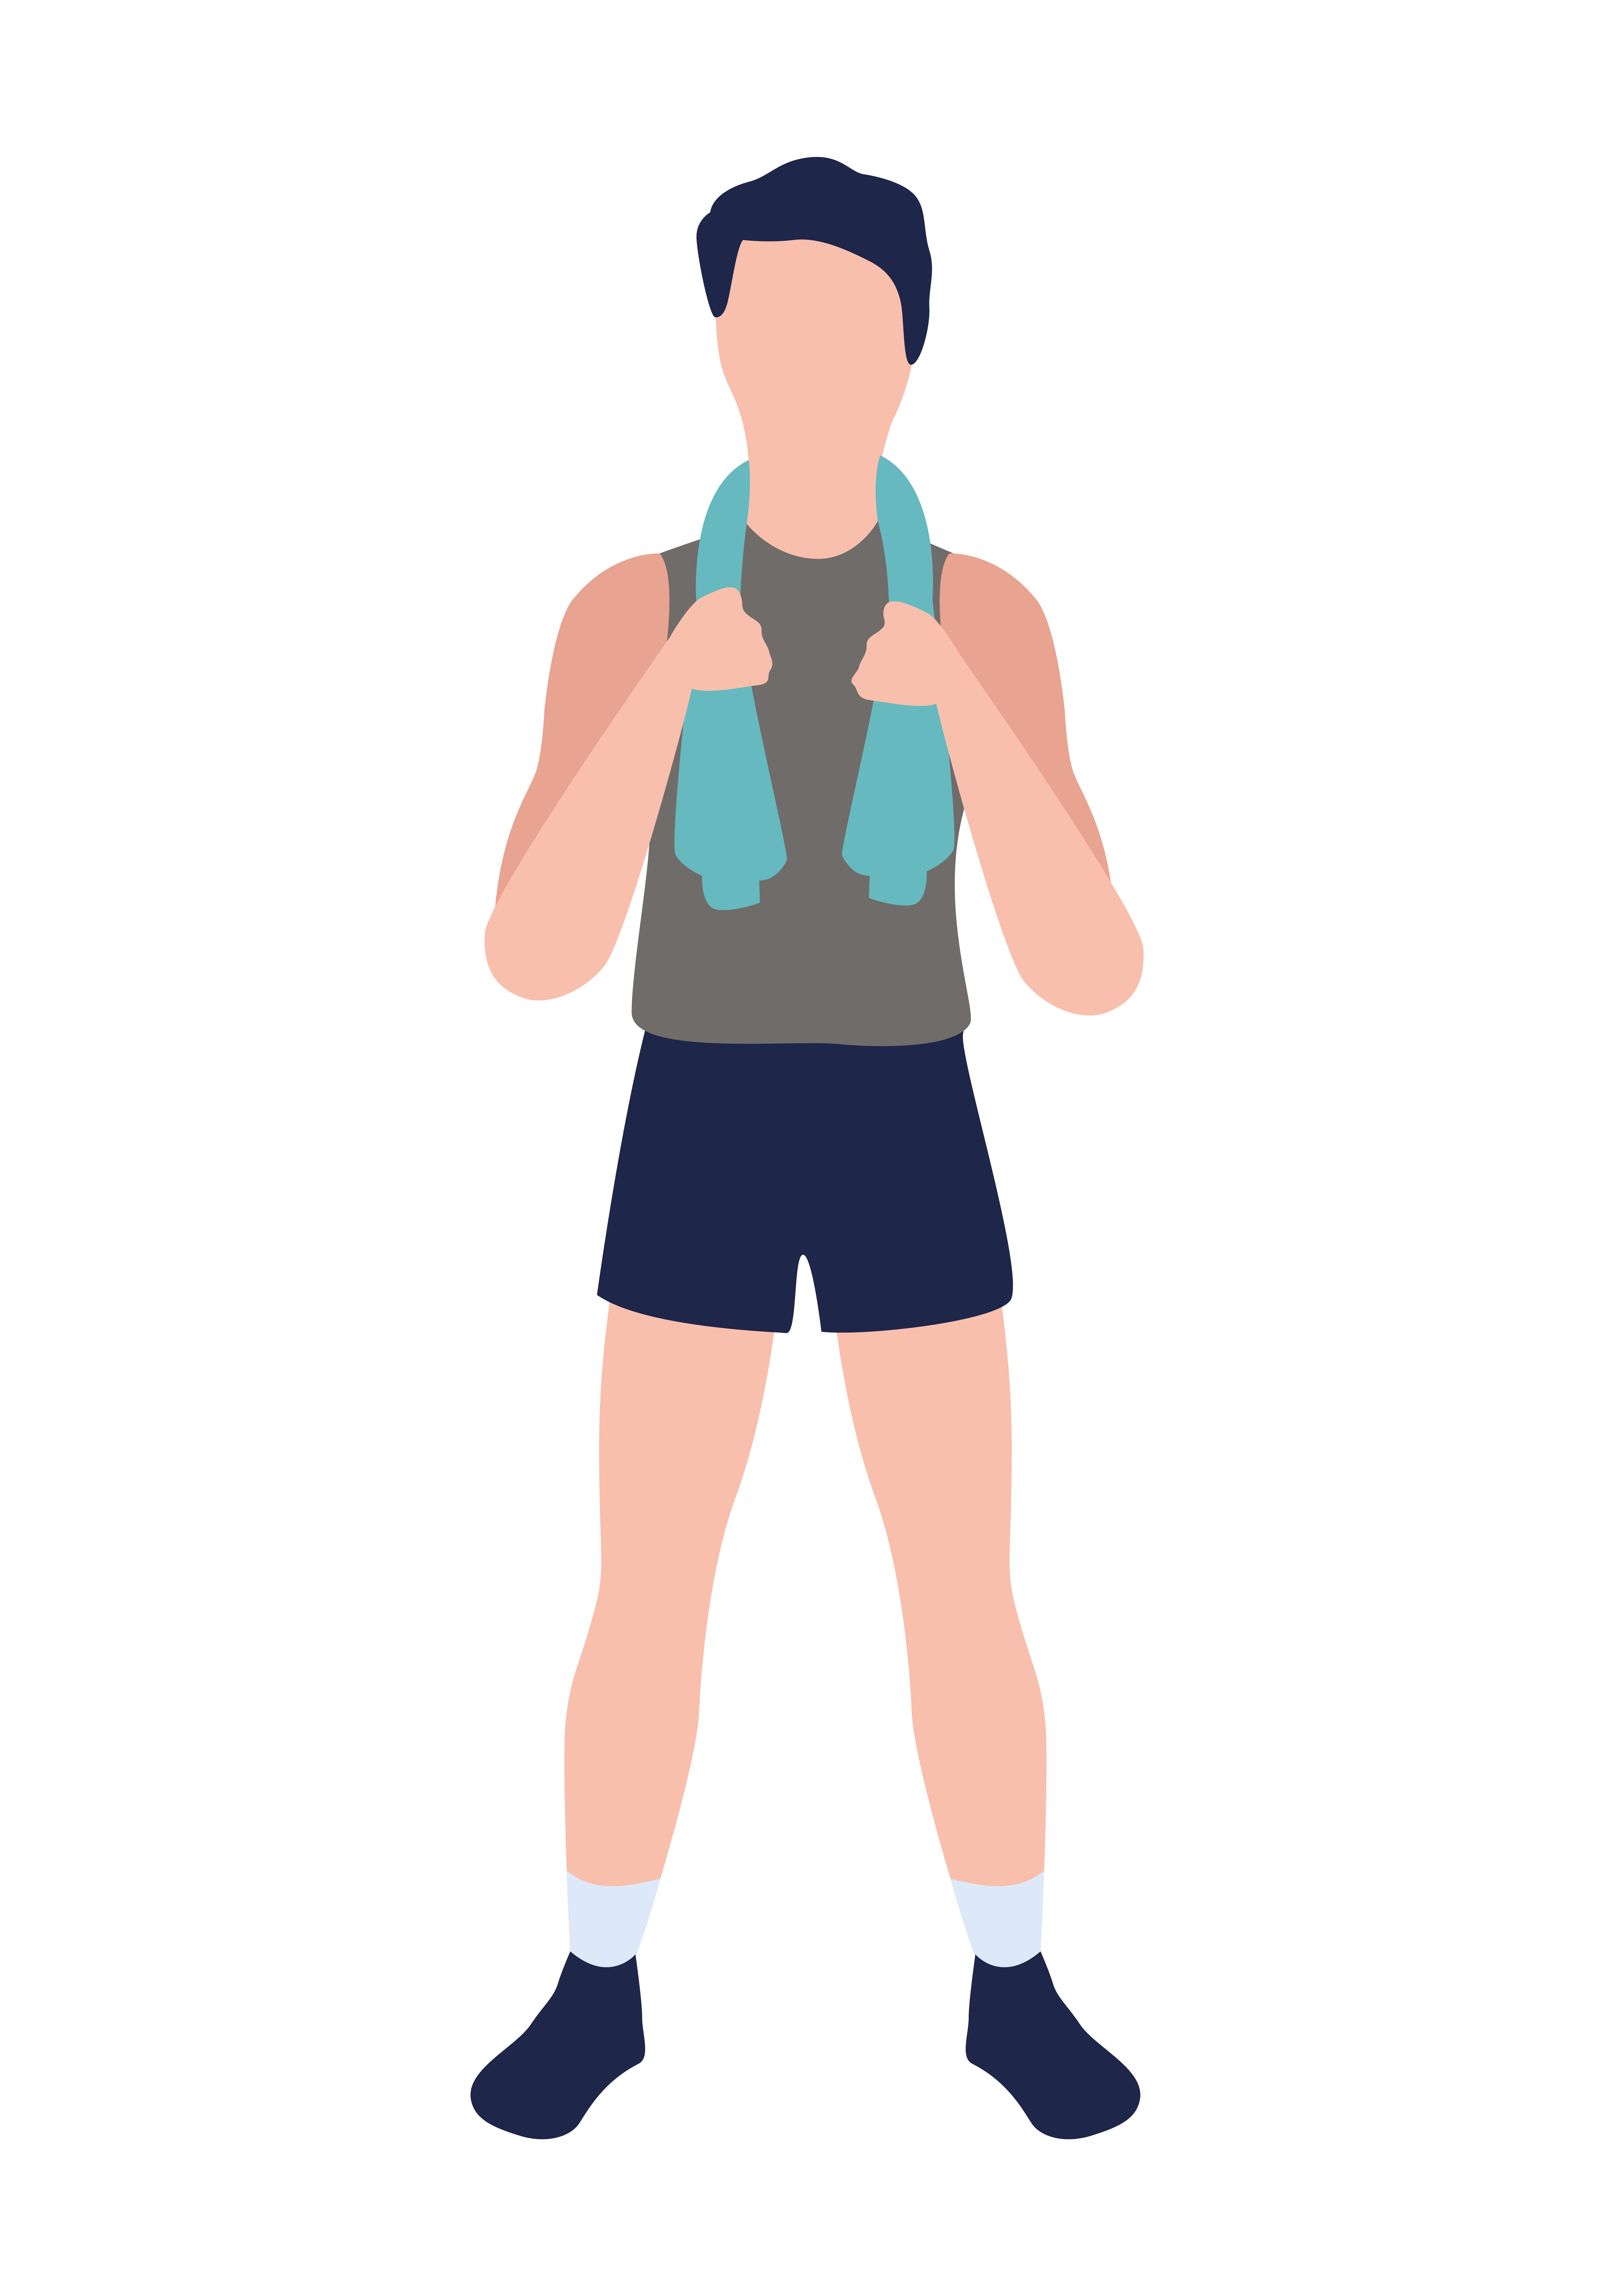 https://static.vecteezy.com/system/resources/previews/003/687/440/original/man-fitness-with-towel-free-vector.jpg